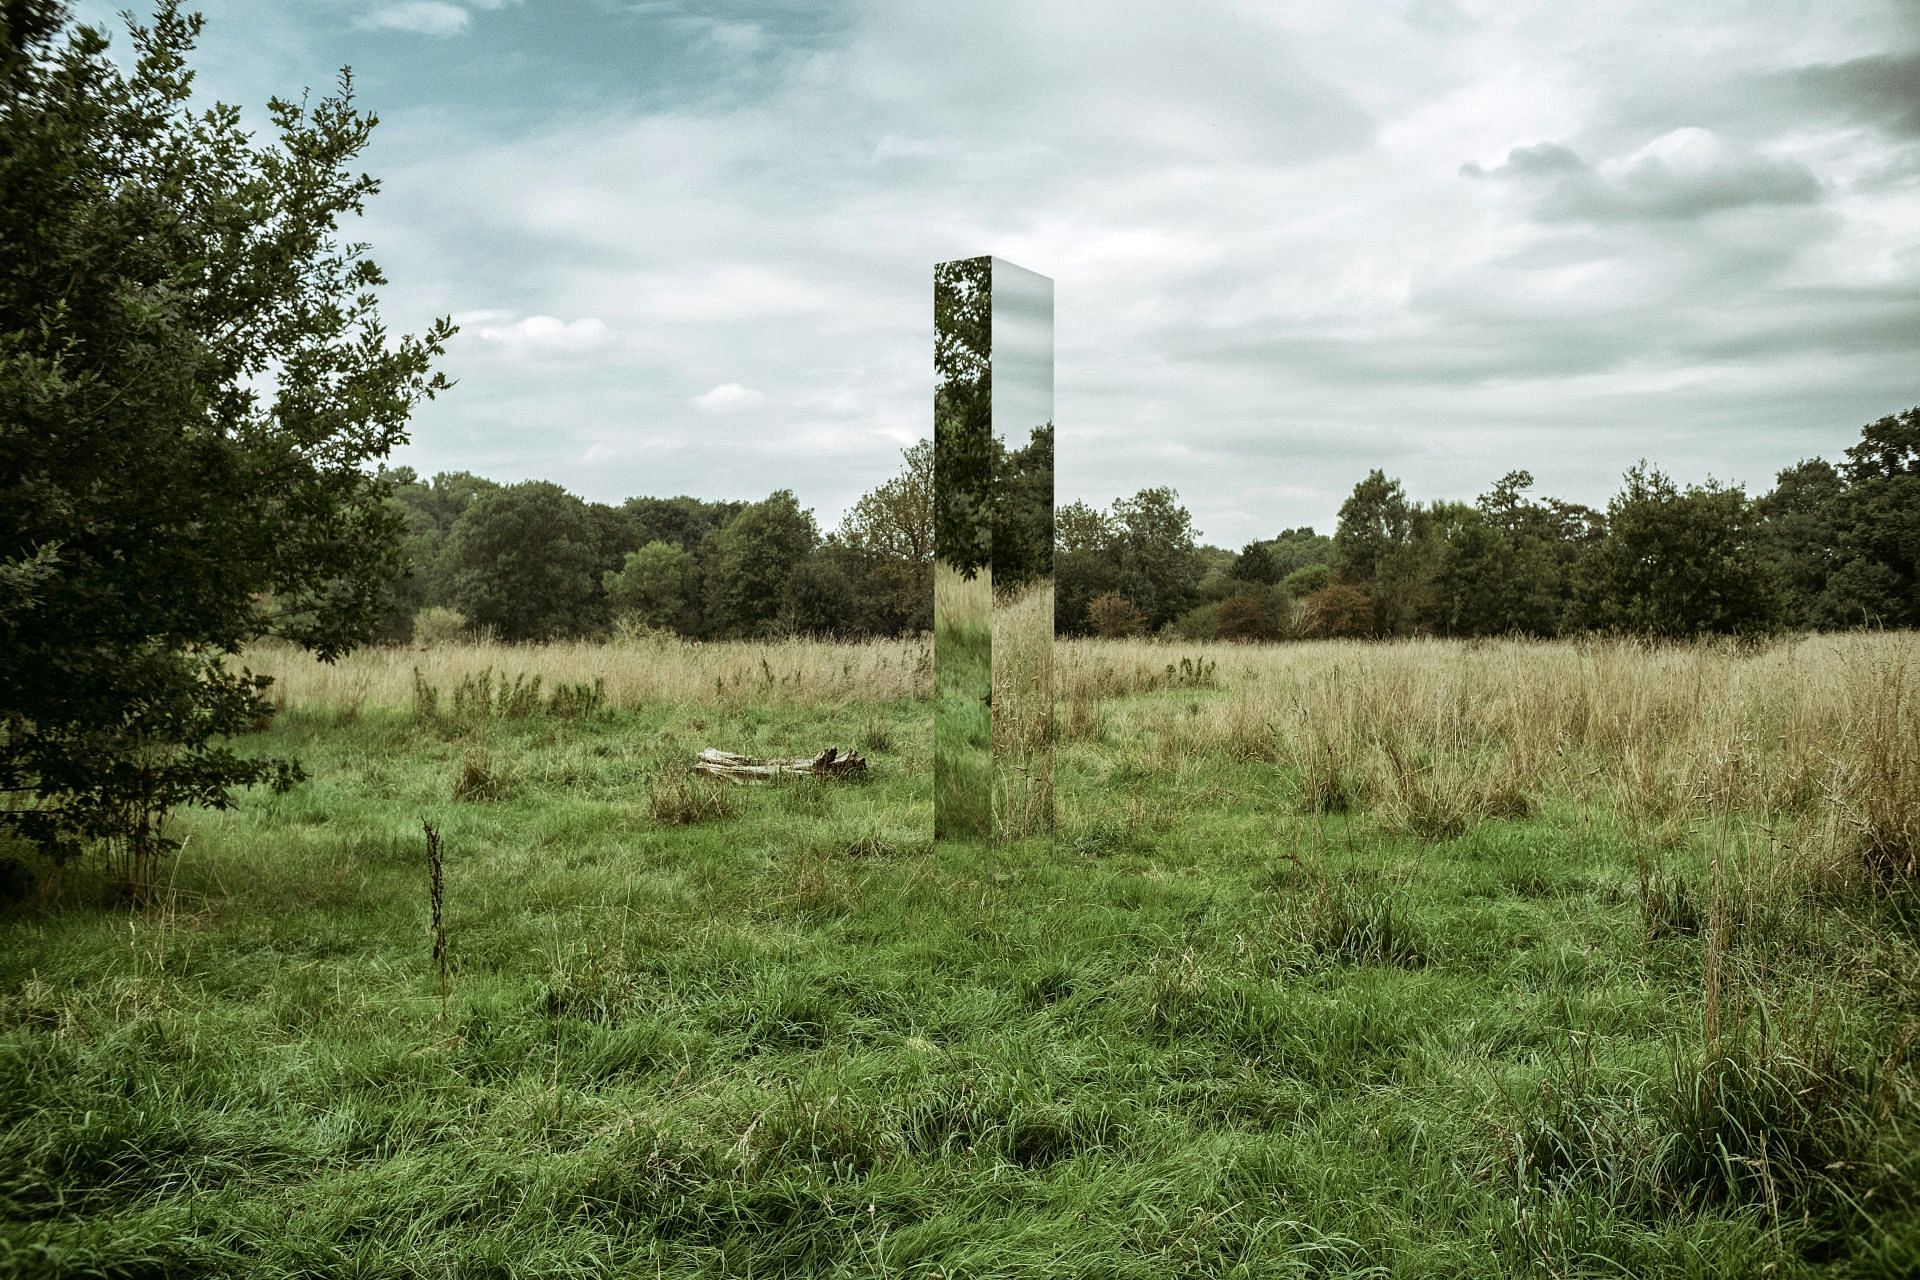 Peculiar monolith appears in Wales town (Representative image via Unsplash Images)